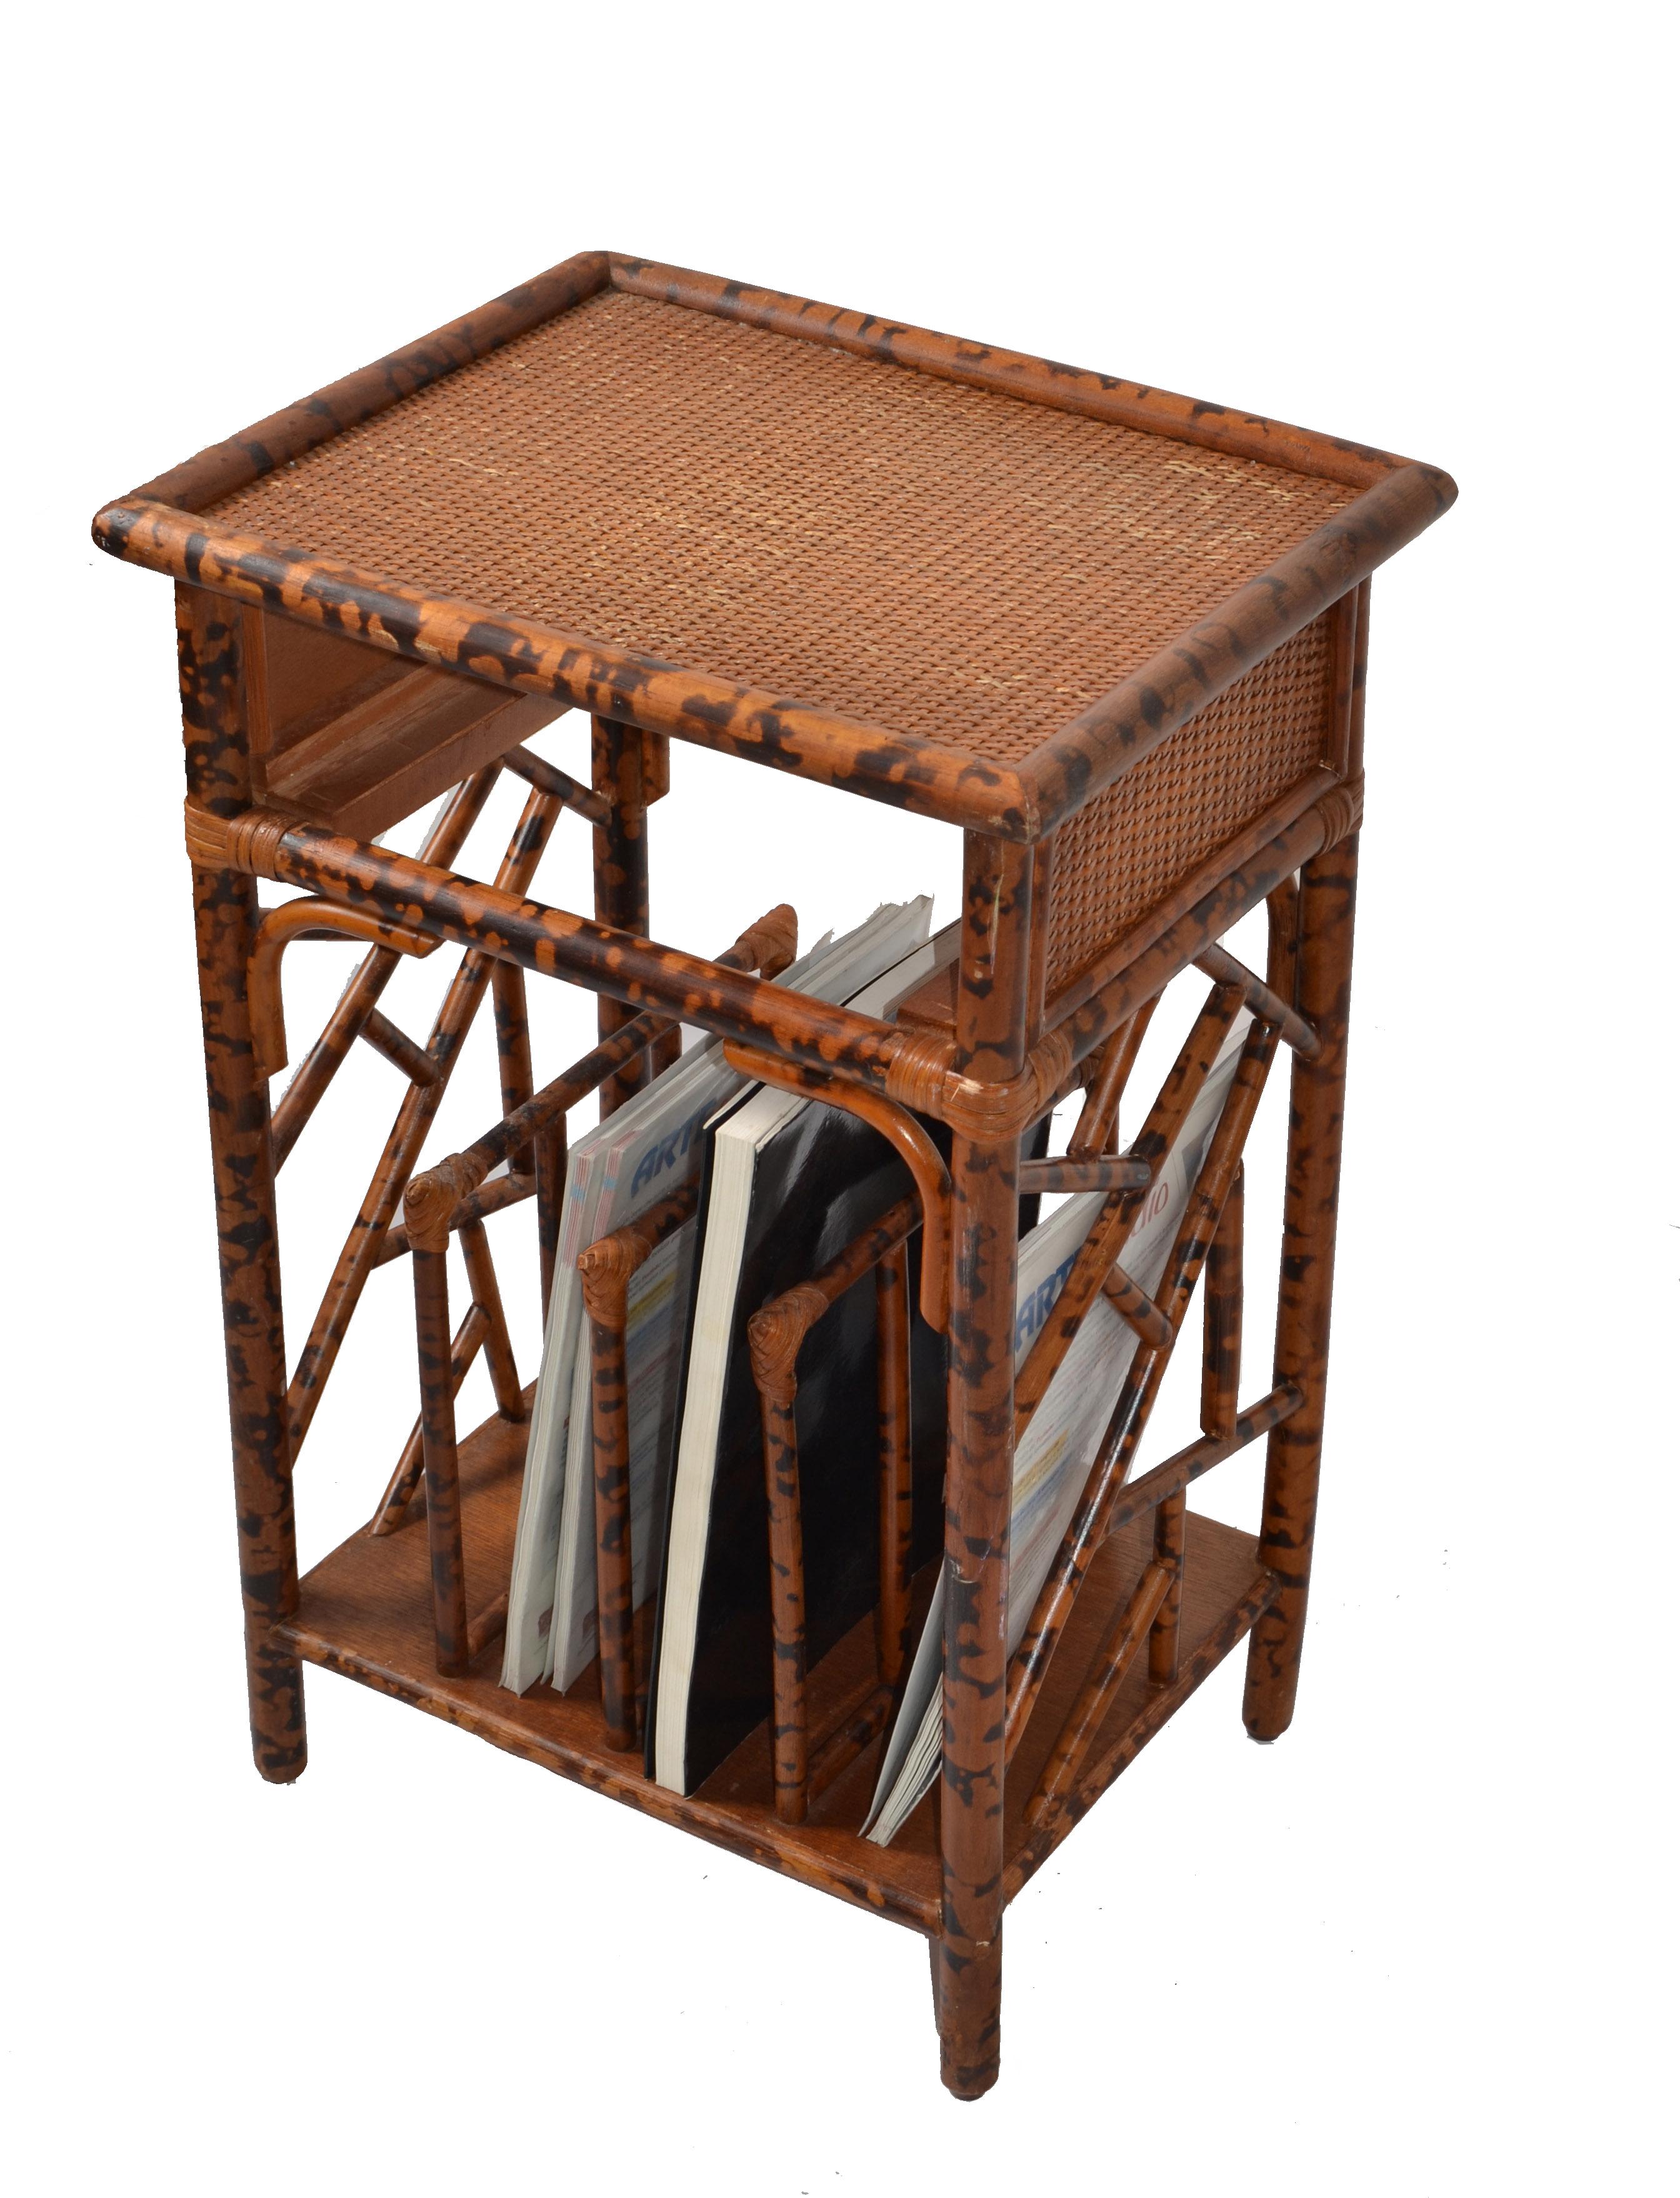 British Colonial Style Boho Chic Side Table featuring Faux Bamboo frames with a Faux Tortoise Finish, handwoven Cane panels. Chinese Chippendale sides and bases with magazine racks.
Parts of Label underneath, Made in the Philippines.
Asian Modern